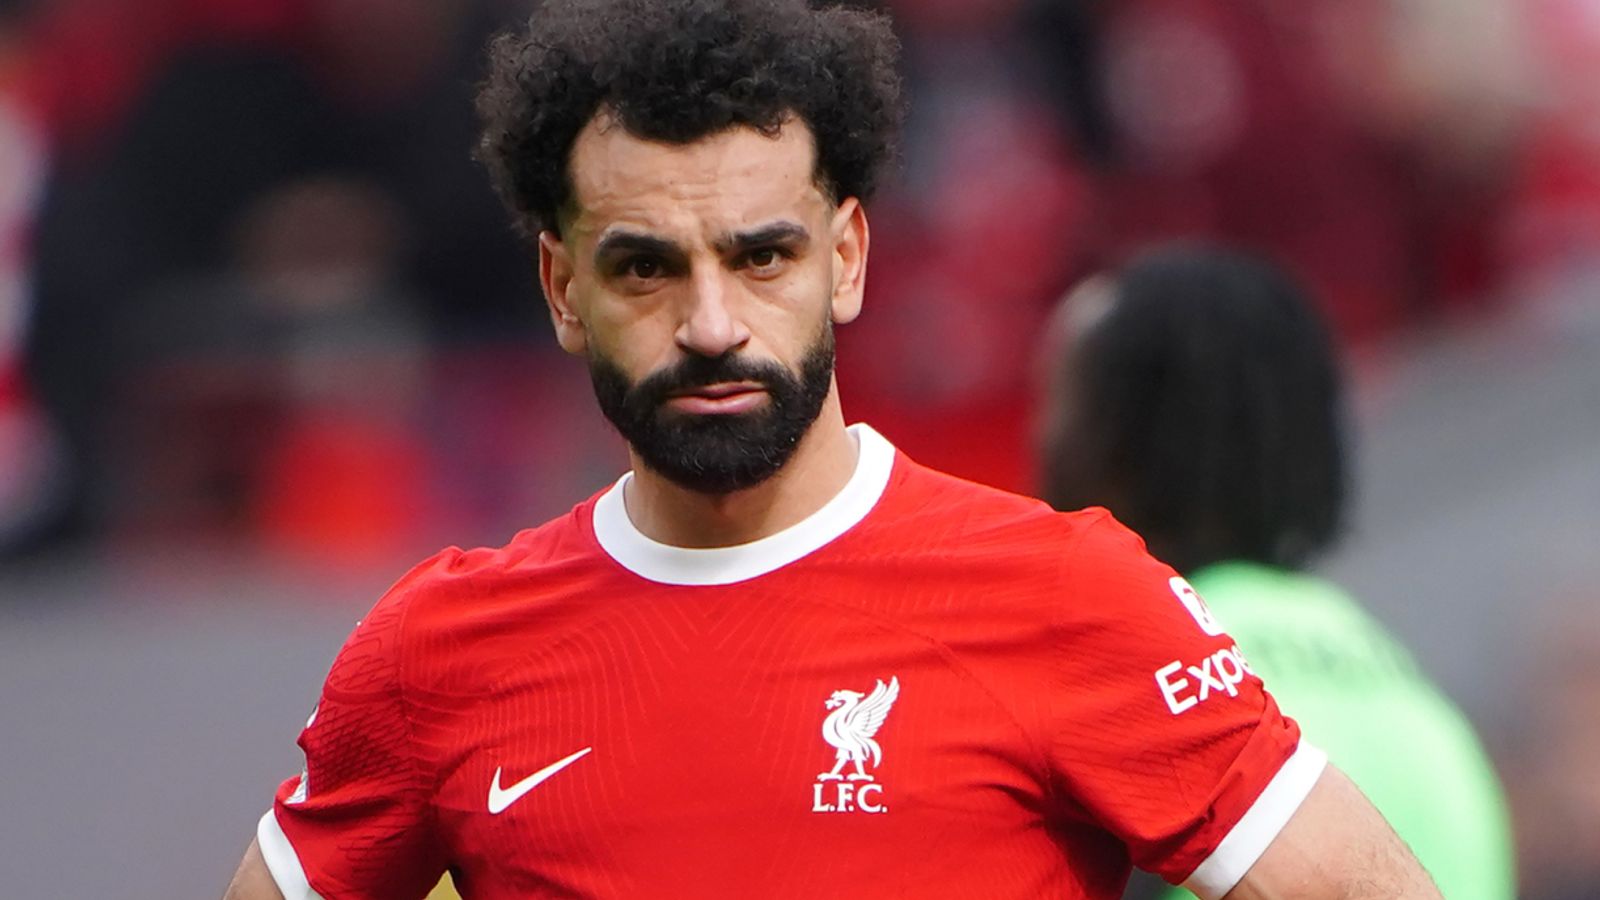 Mohamed Salah's Clash with Jurgen Klopp: Was the Liverpool Star Out of Order?